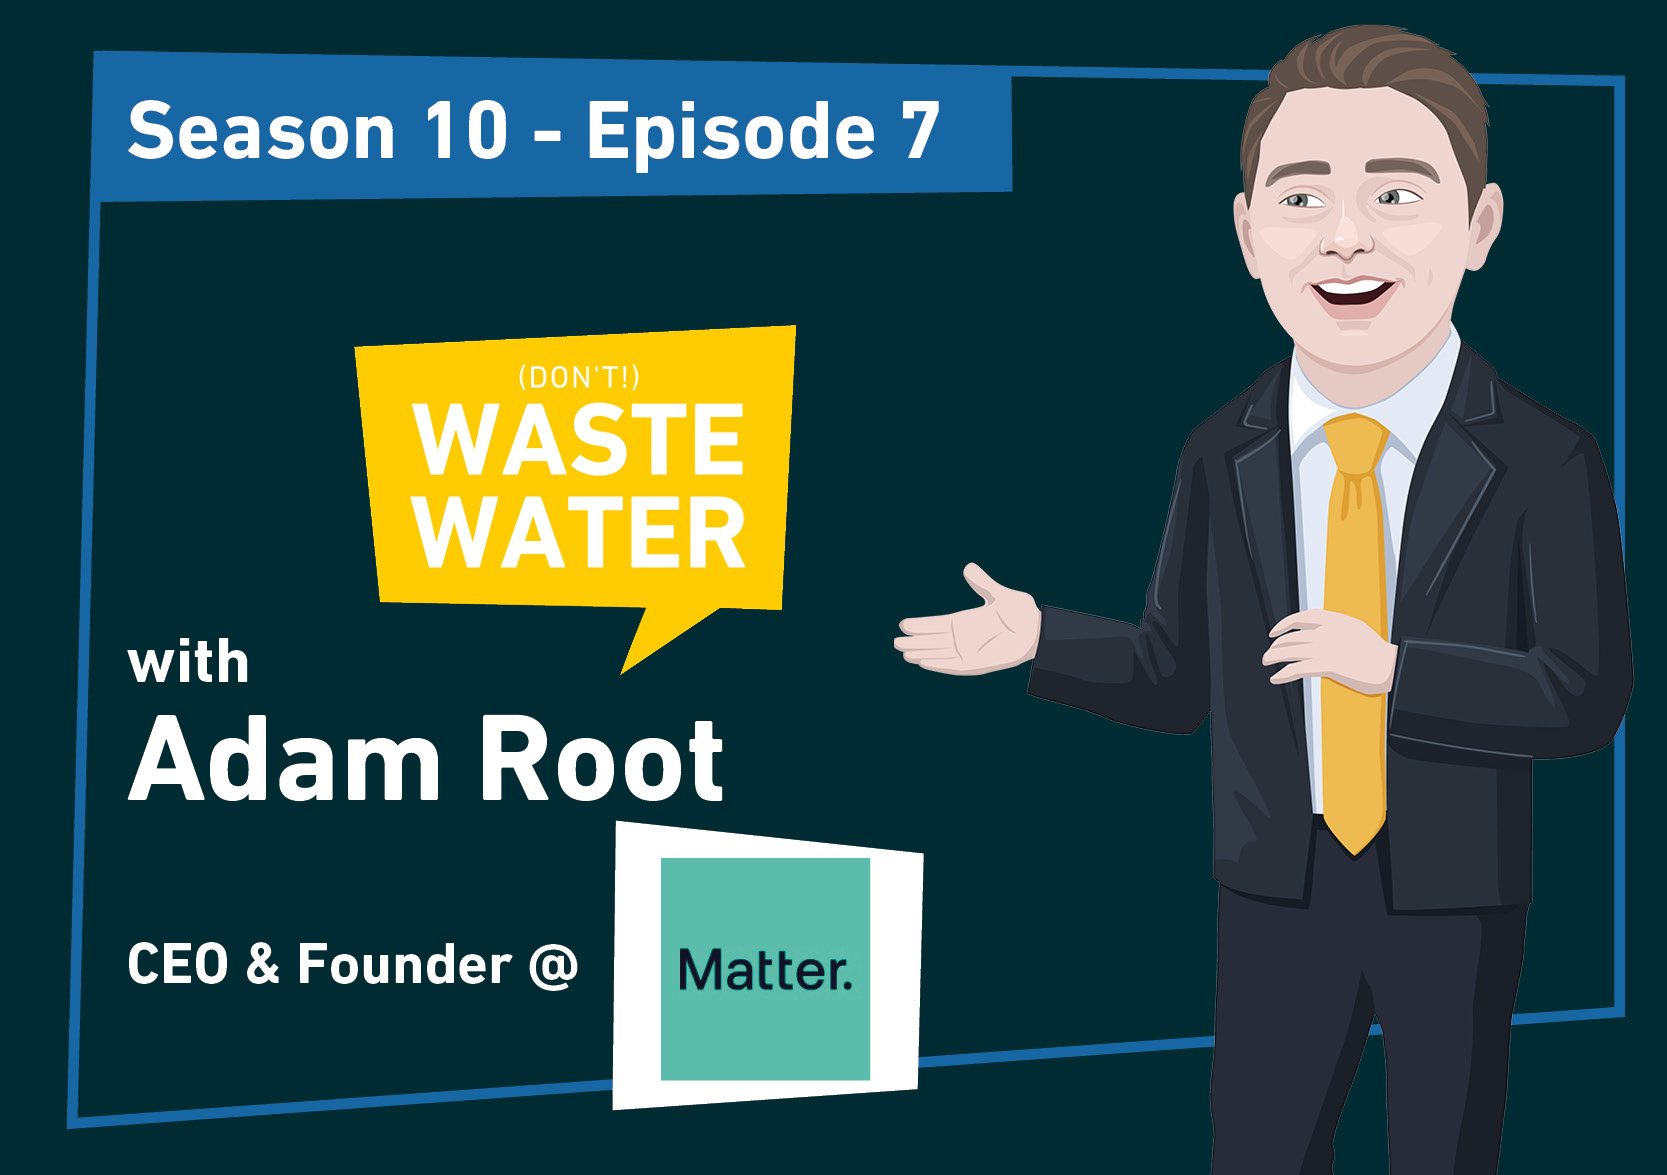 Adam Root, CEO & Founder of Matter, a Microplastics removal company